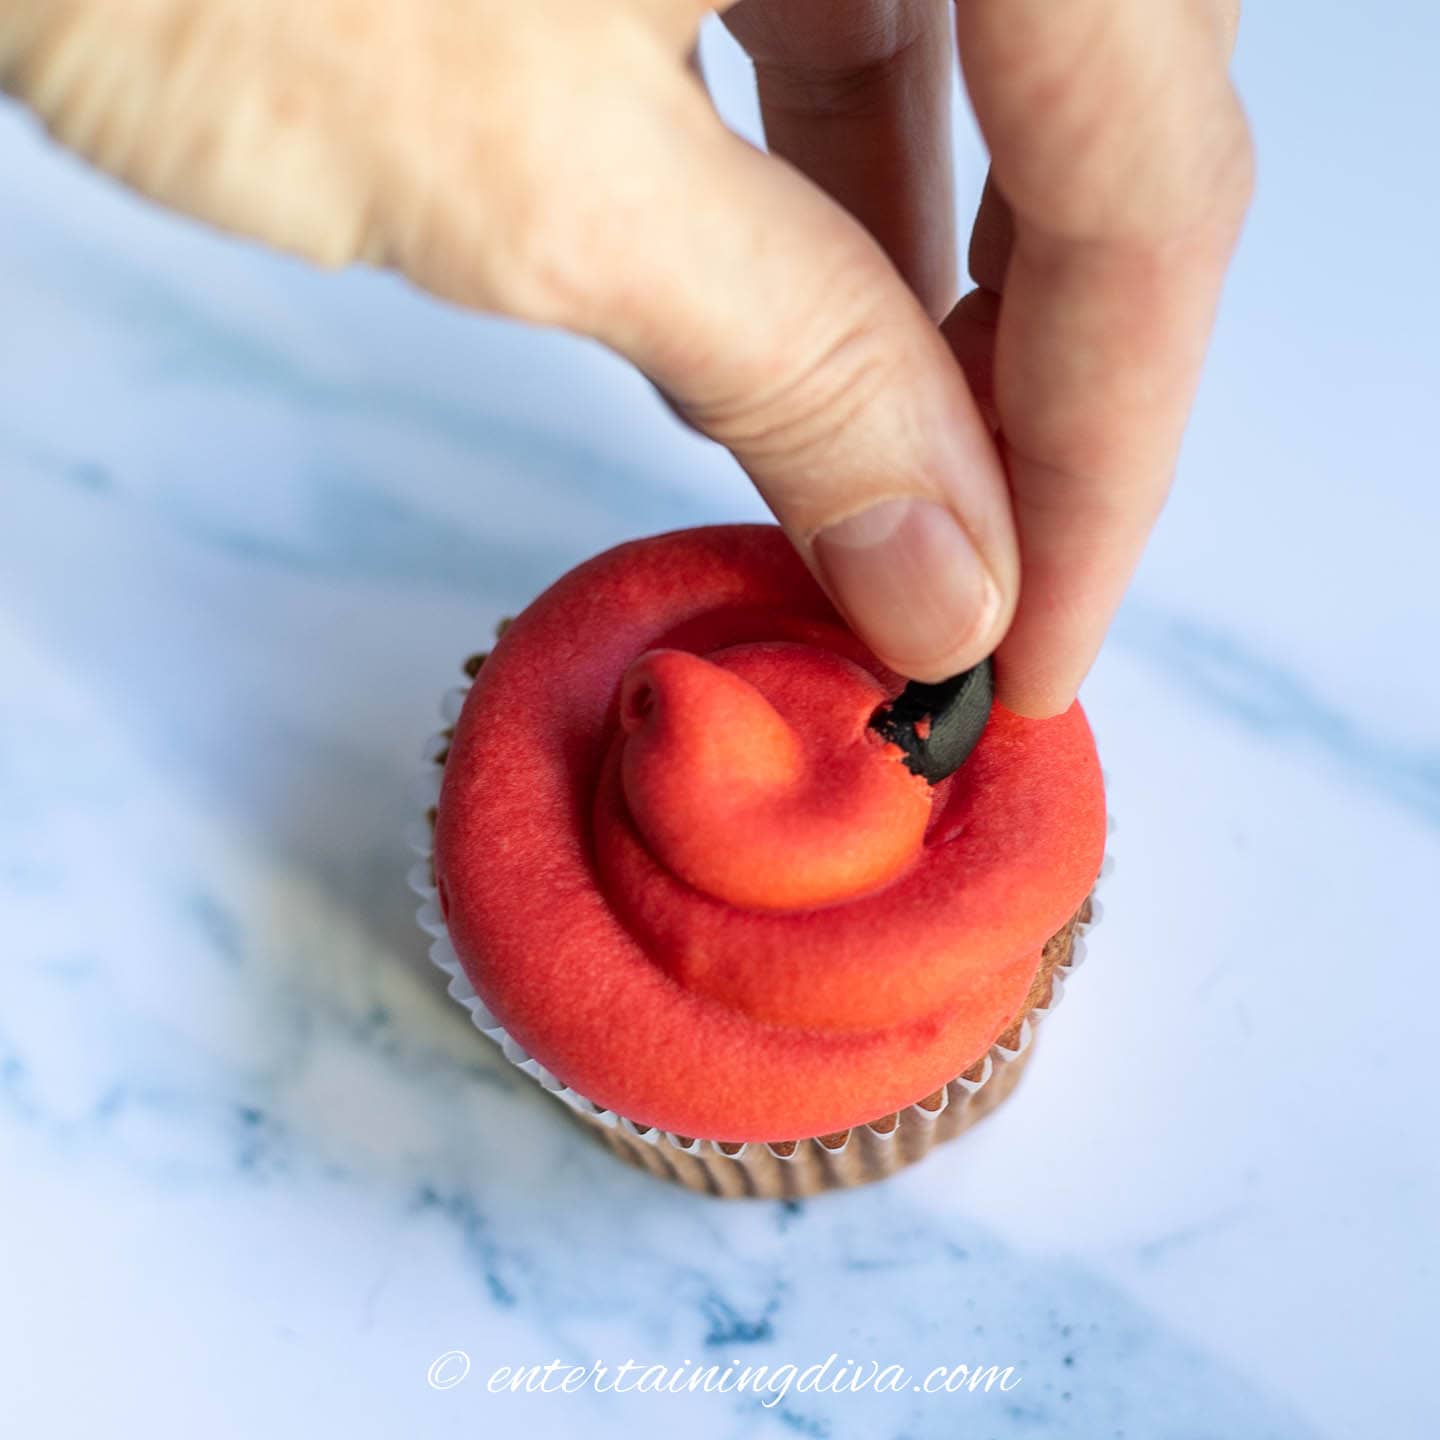 A fondant devil horn being pushed into the top of the cupcake icing